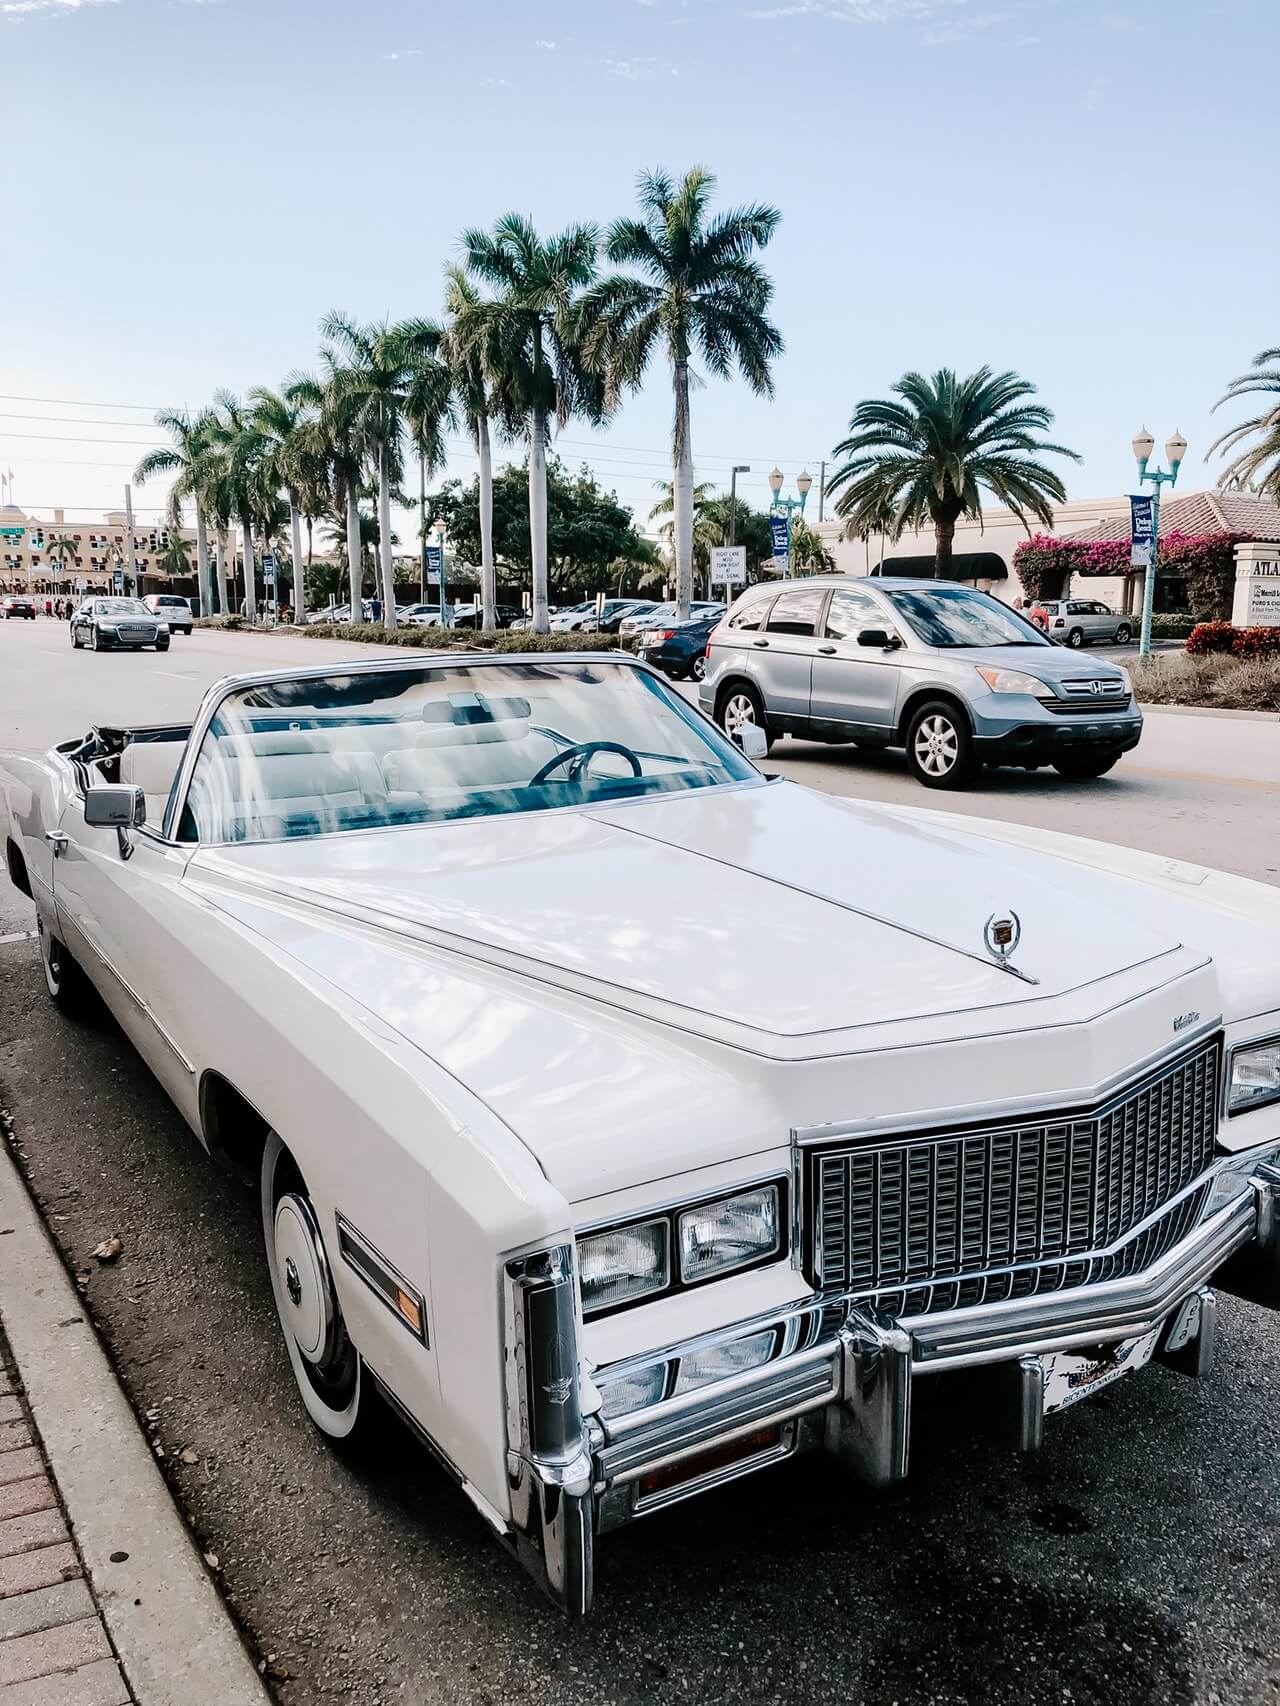 White Cadillac parked on the street 